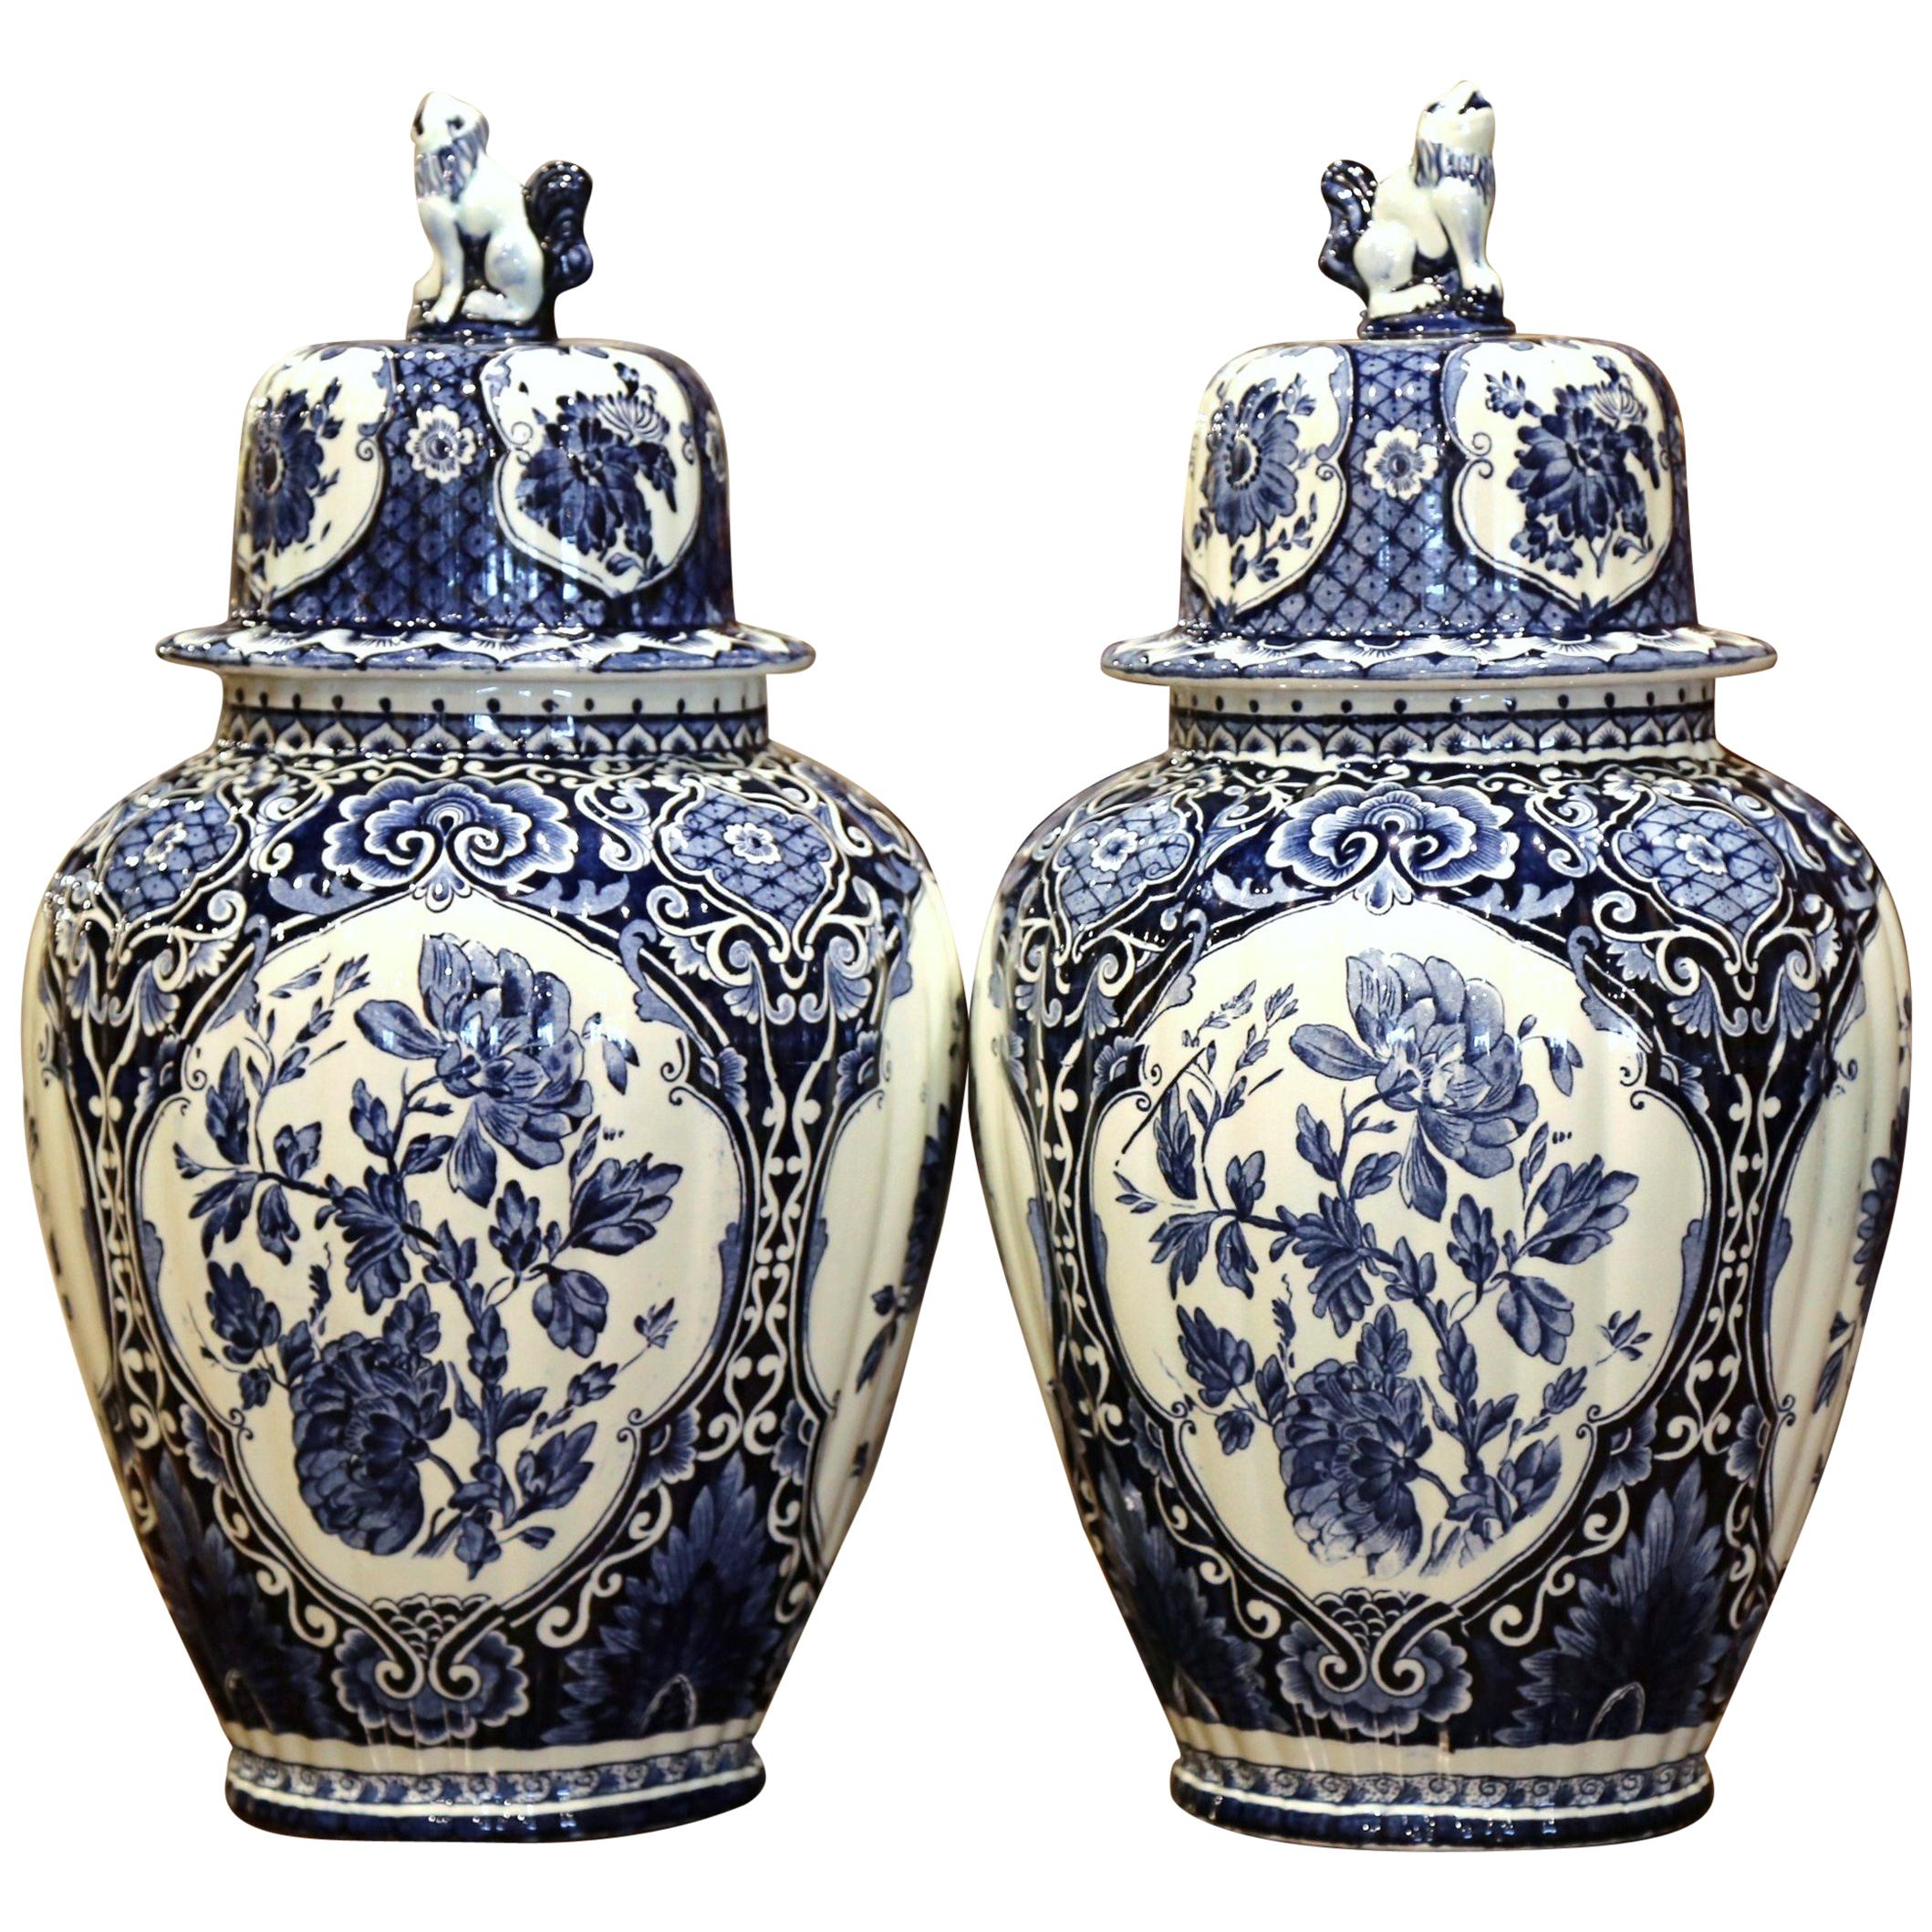 Pair of Mid-20th Century Dutch Blue and White Faience Delft Ginger Jars